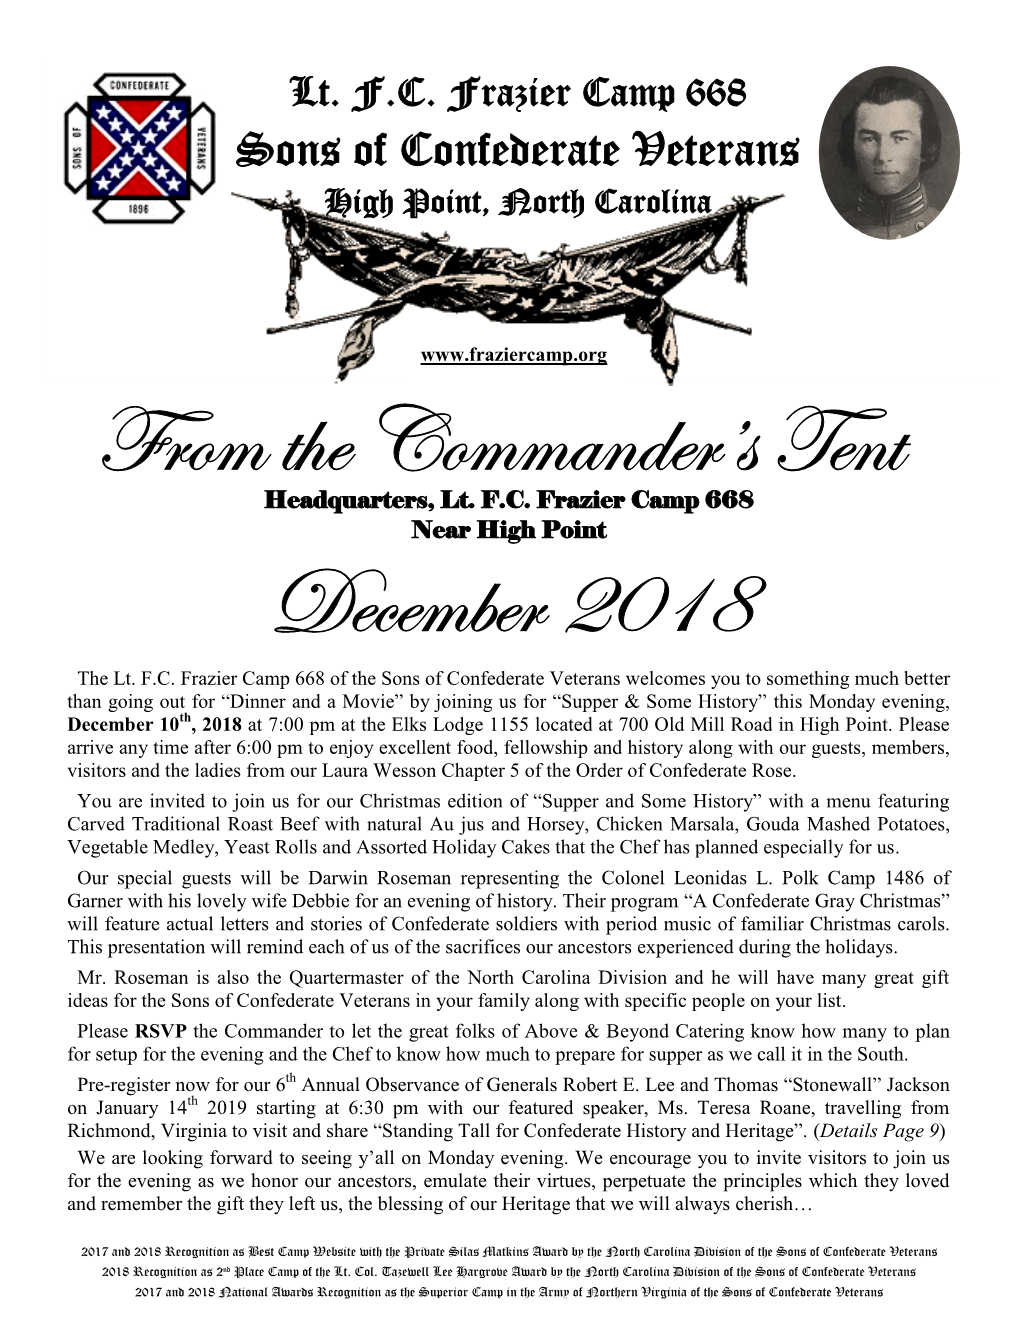 From the Commander's Tent December 2018